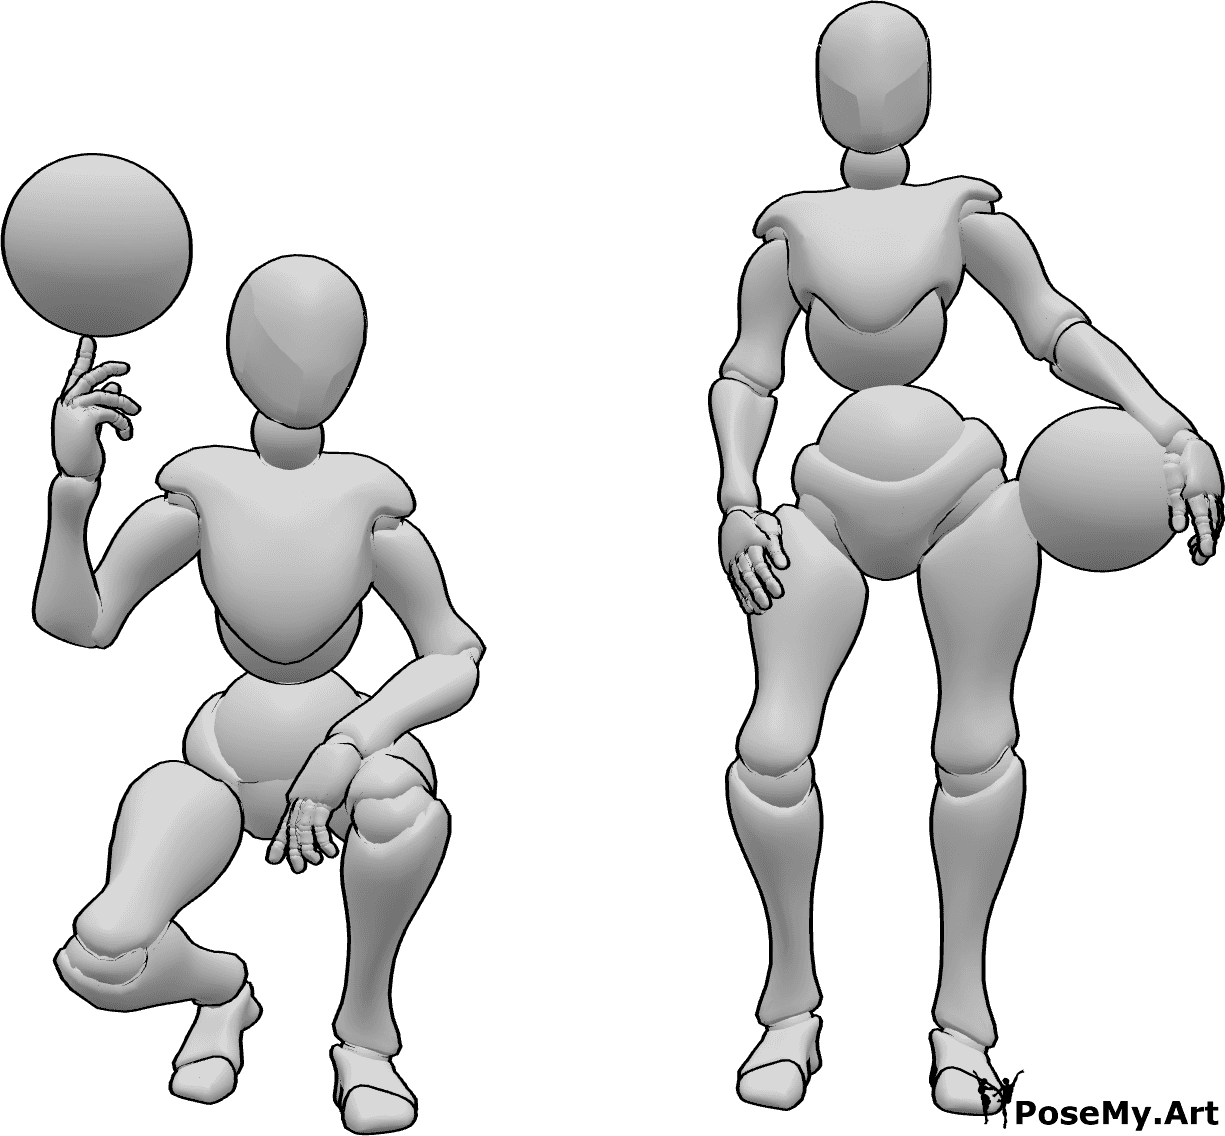 Pose Reference- Female volleyball players pose - Two female volleyball players are posing confidently, holding volleyballs